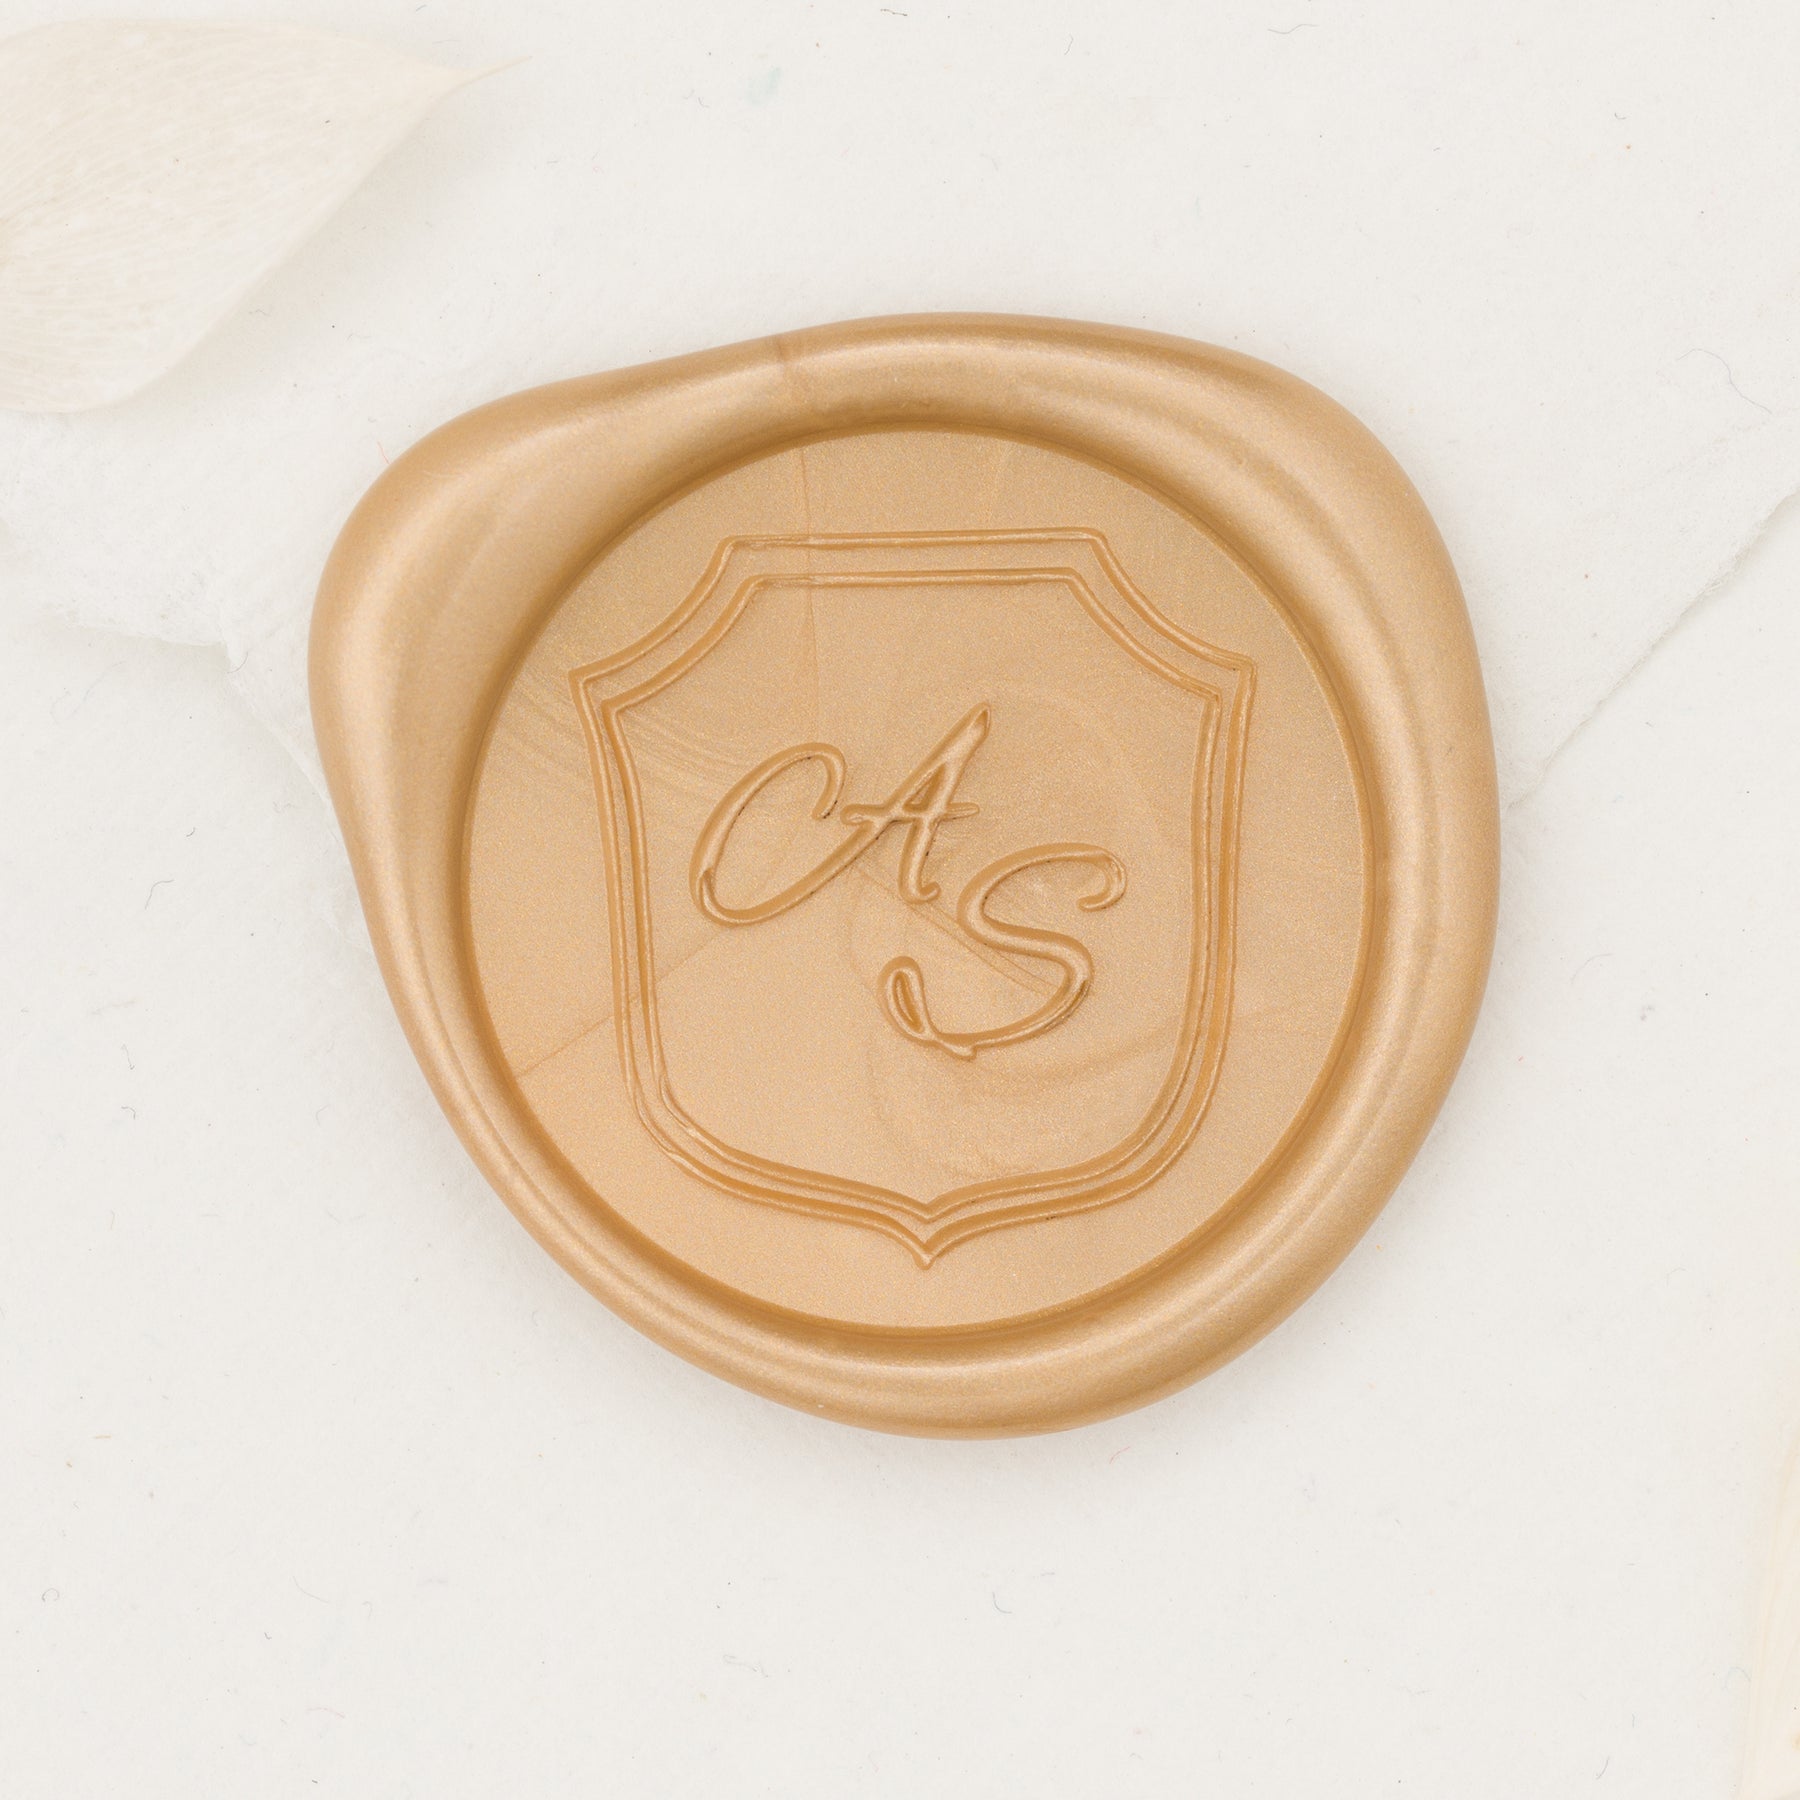 Falling in Love Wax Seal Stickers, Self Adhesive Wax Seals, Pearl Wax Seal,  Wedding Wax Seals, Wax Seals for Invitations, Wax Seals 